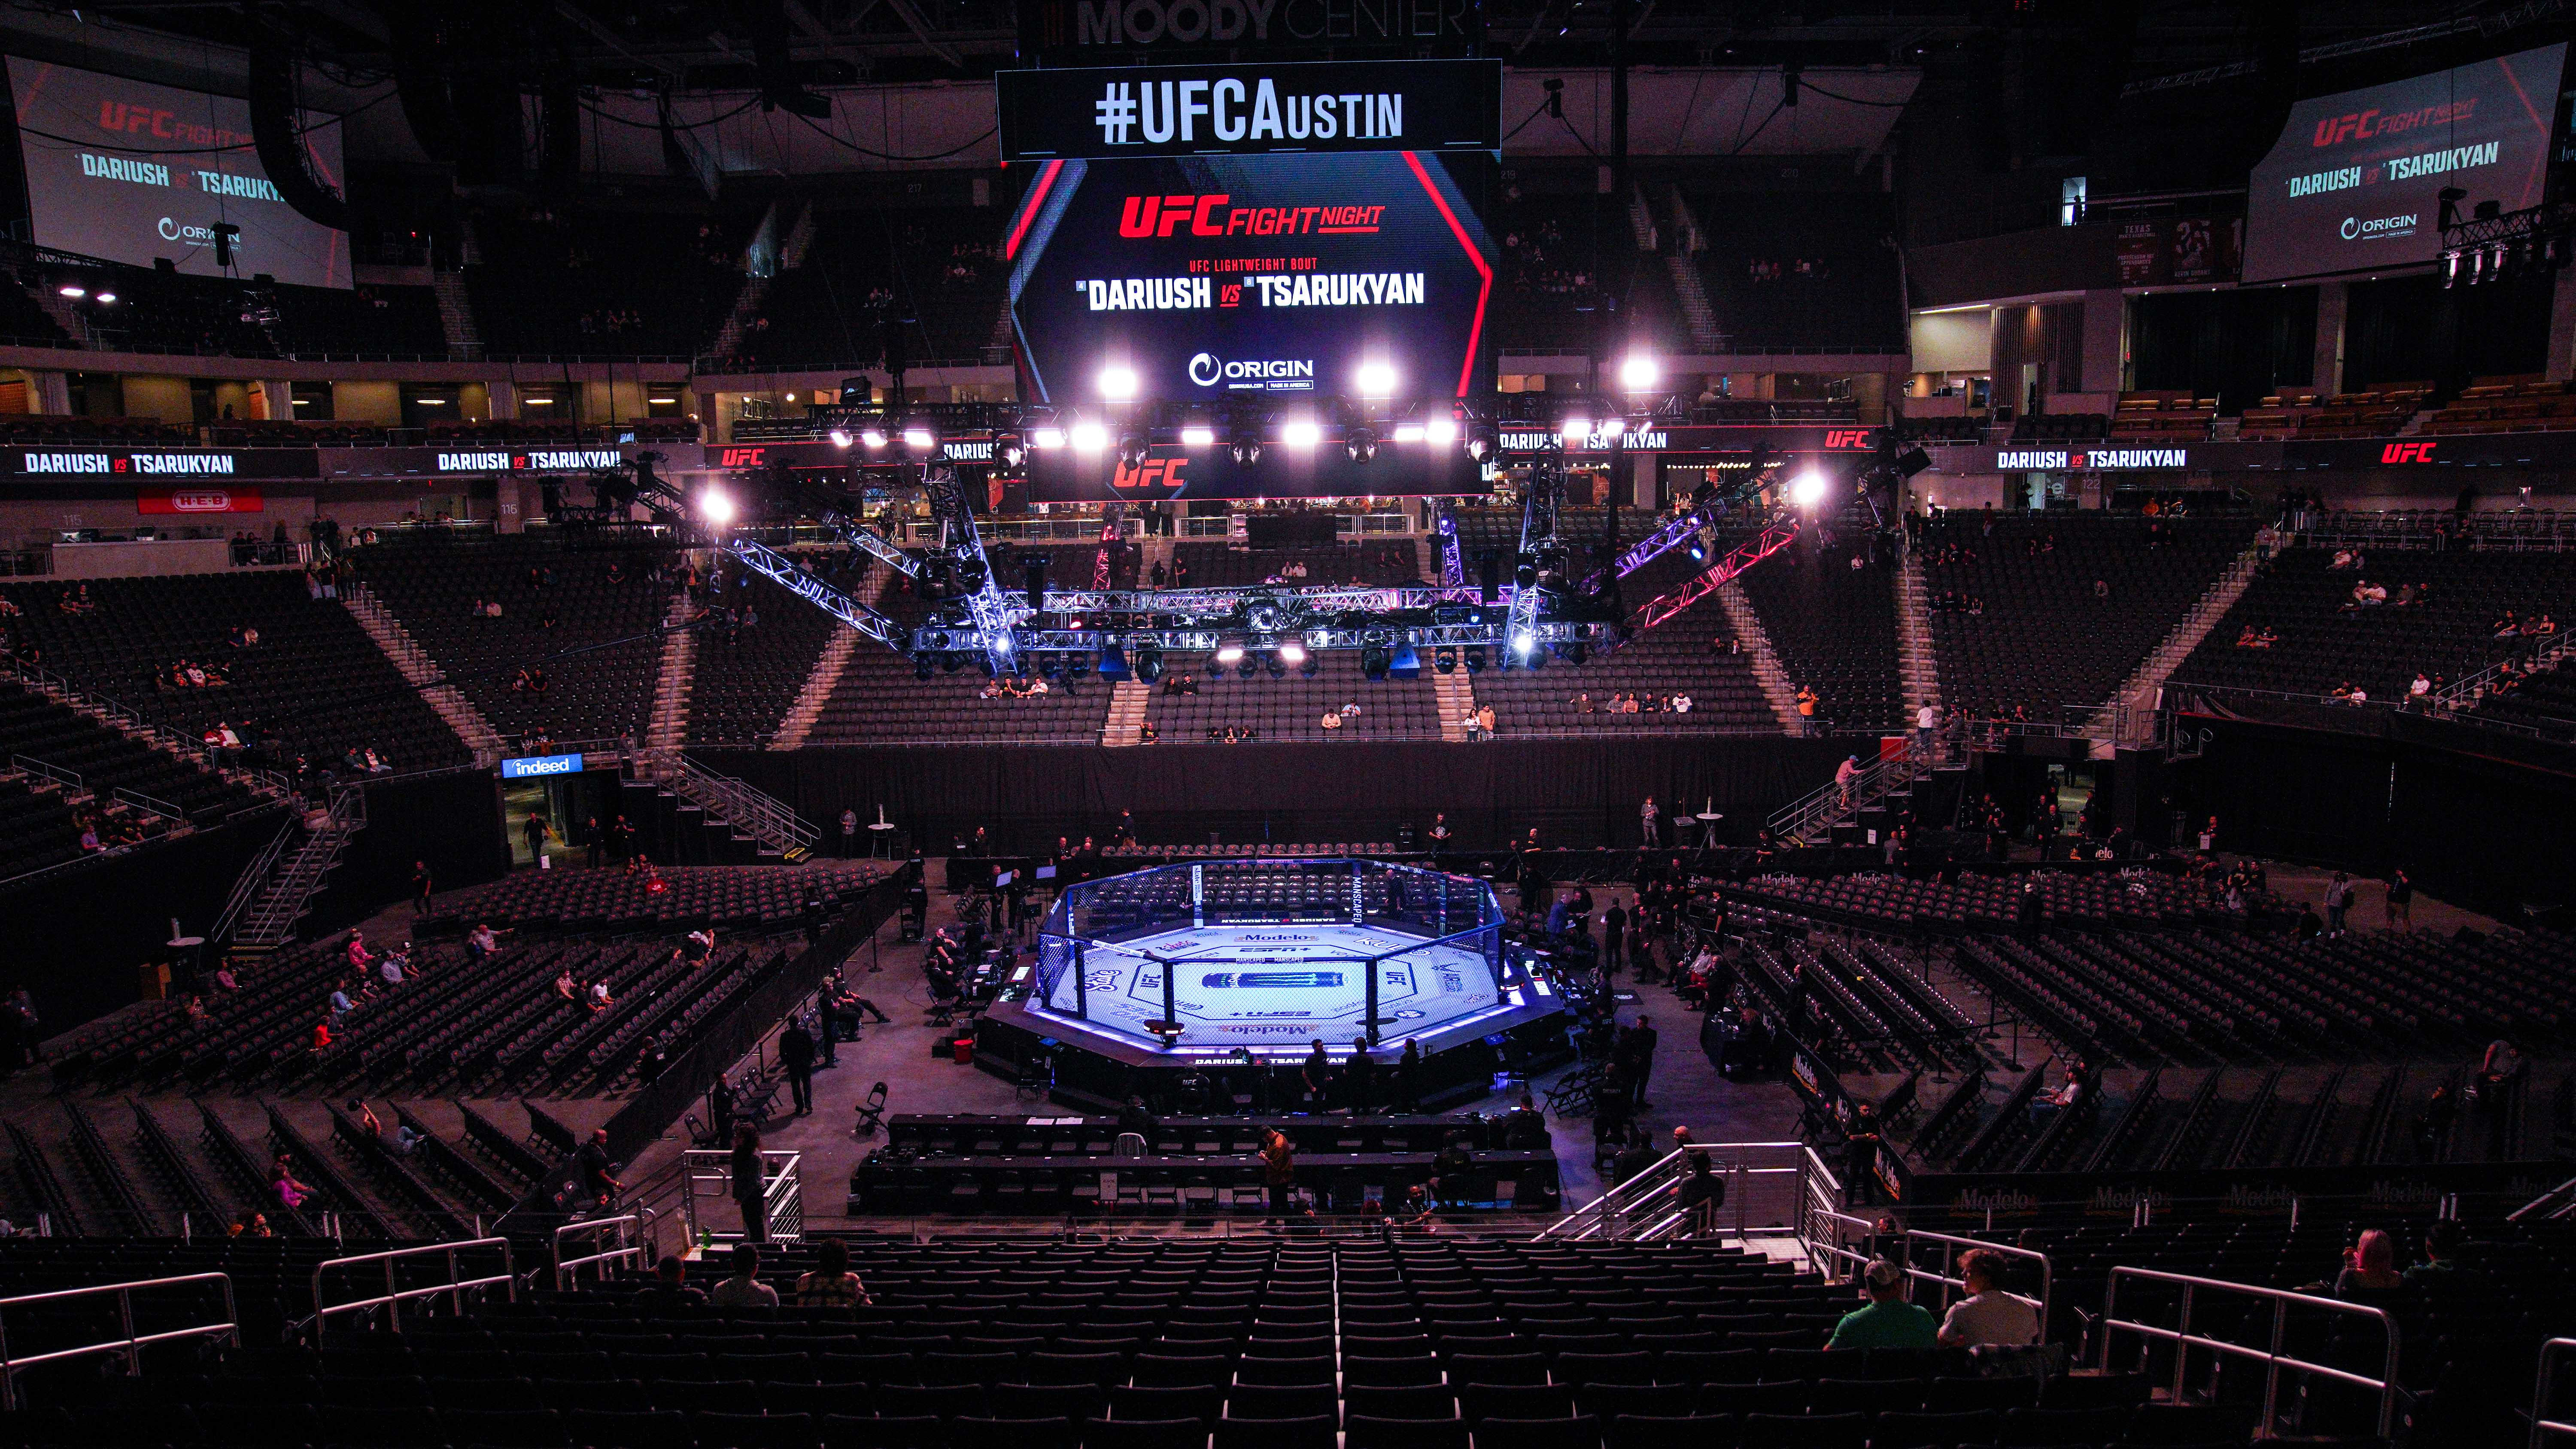 UFC Fight Night Main Event Cancelled